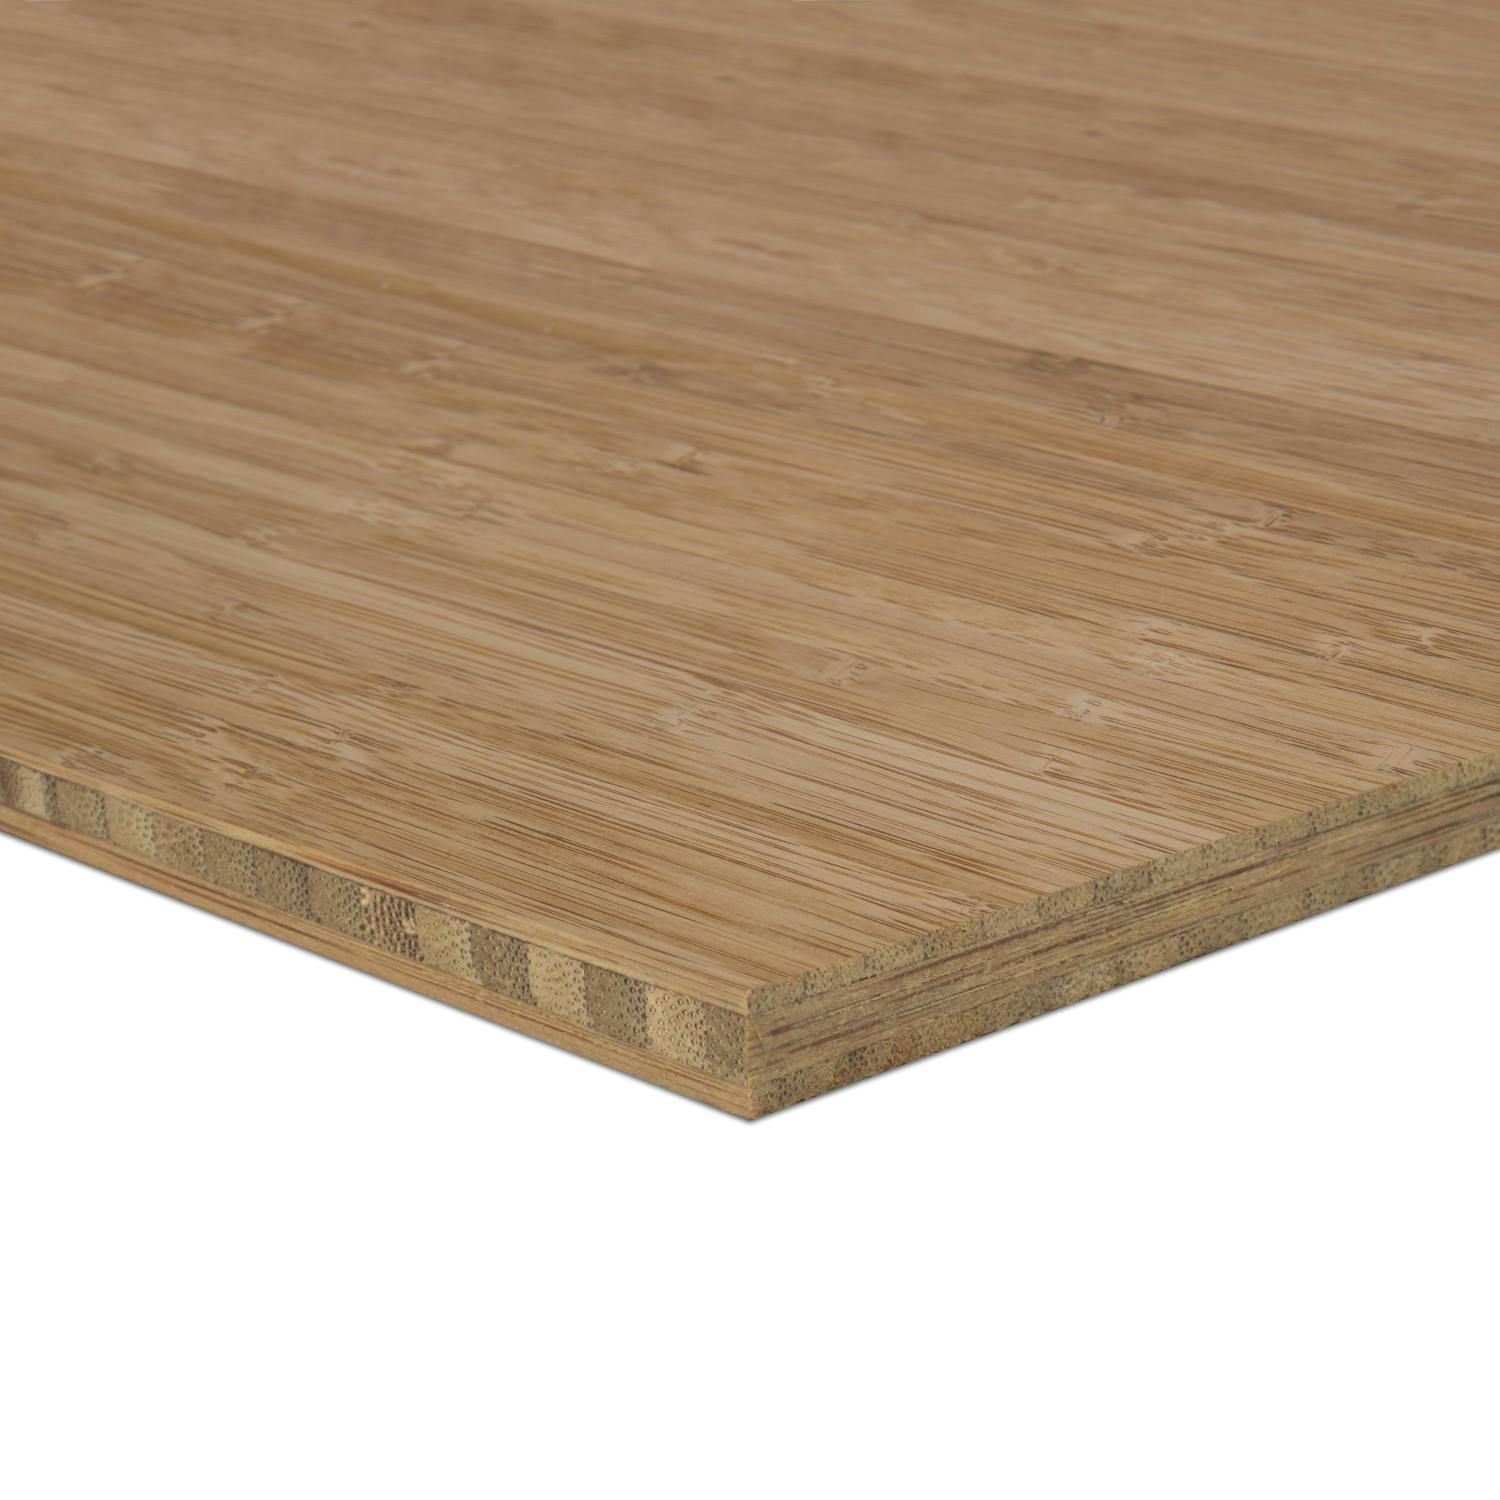 Bamboo Plywood - 3ply 1/4 in. Vertical Carbonized